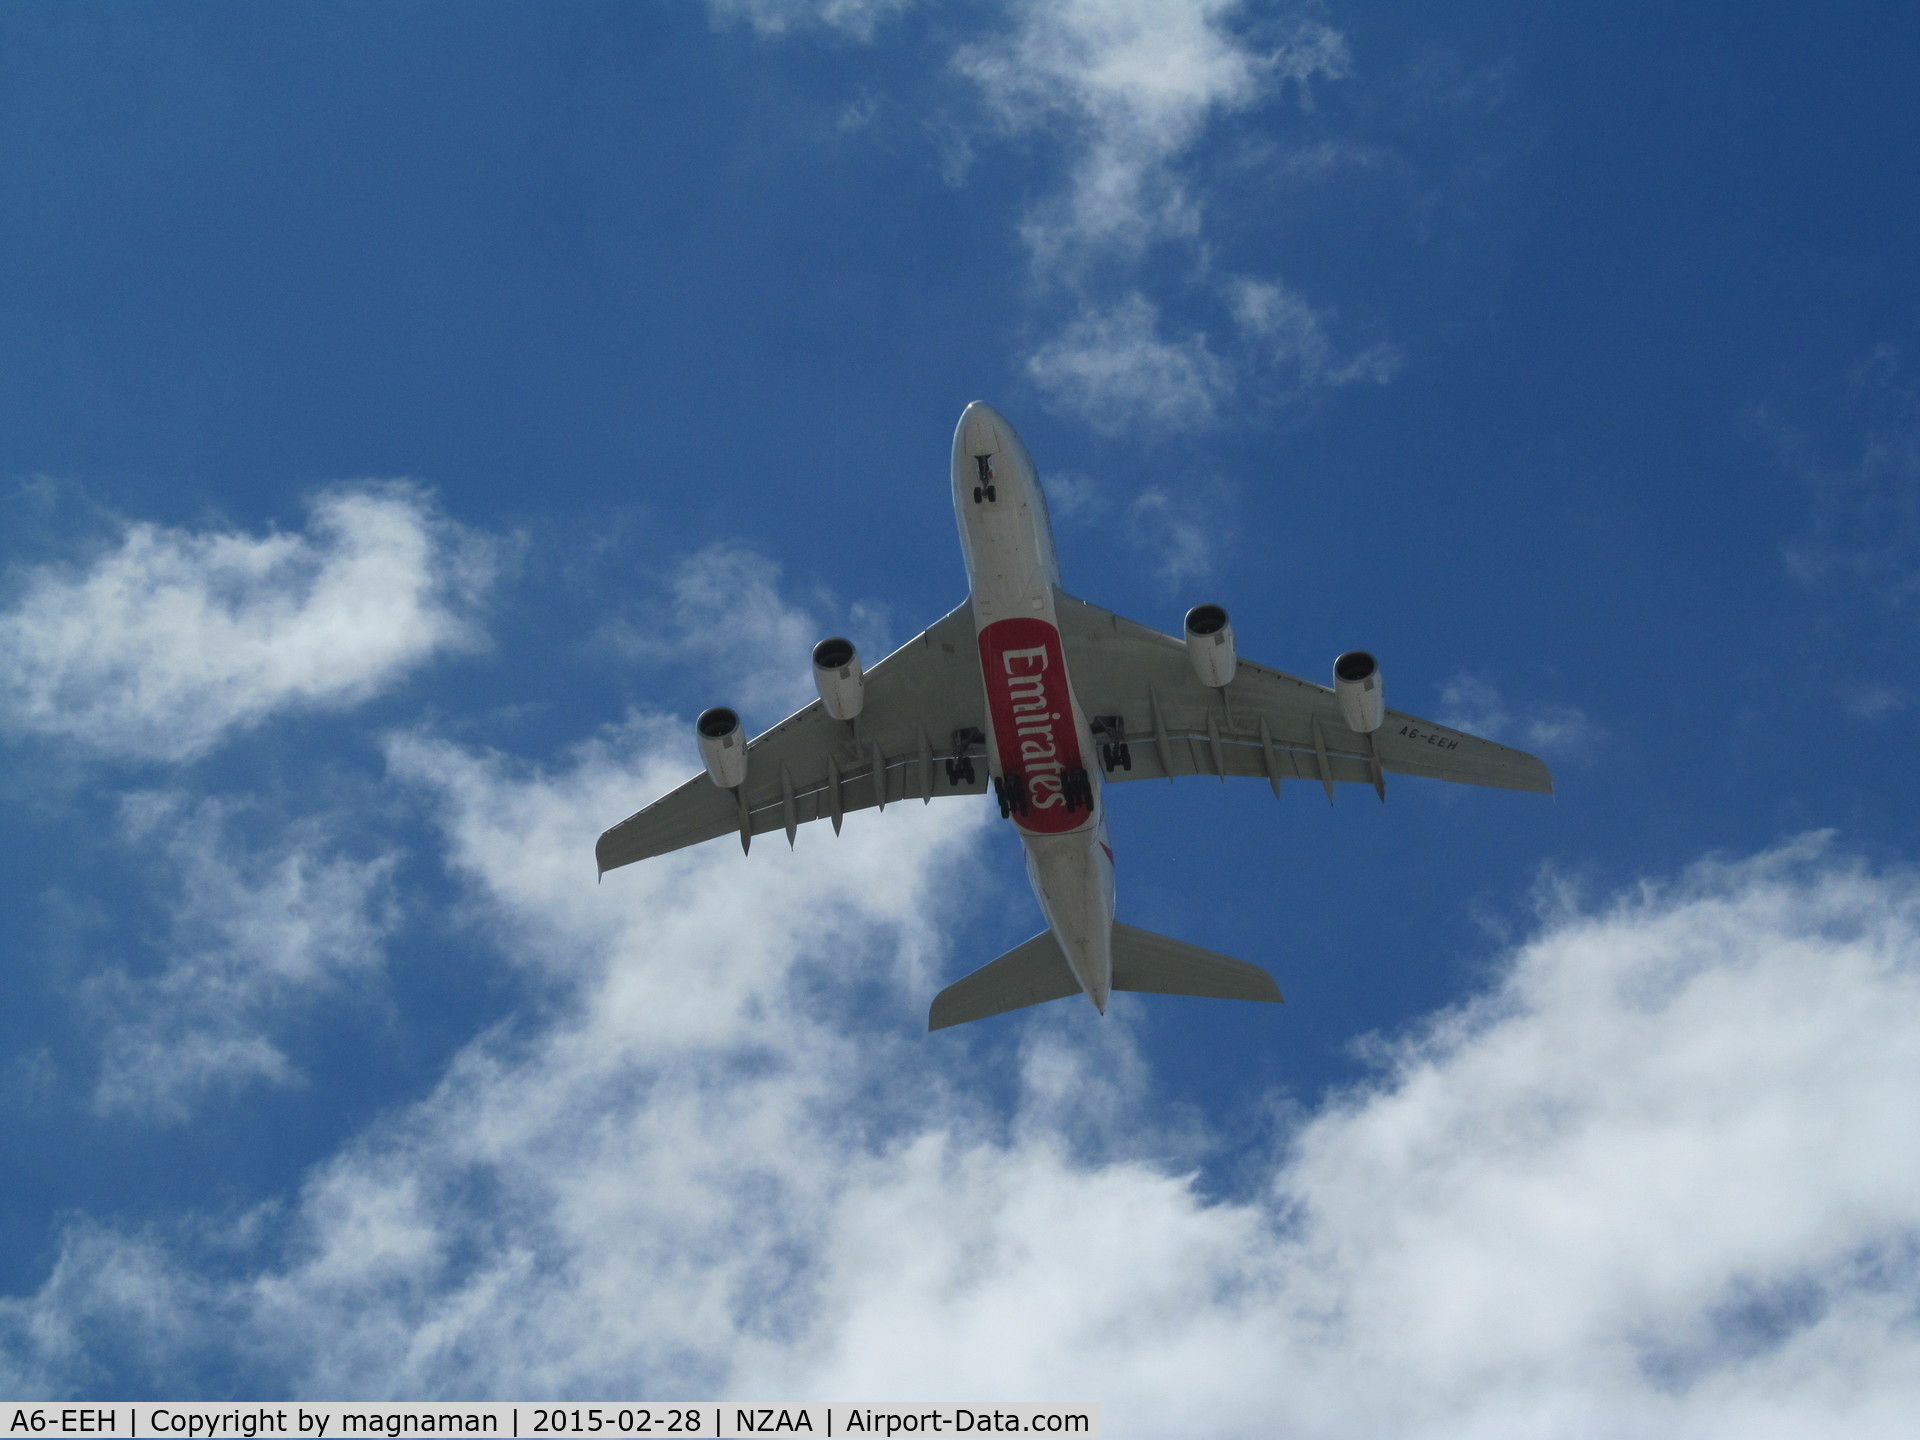 A6-EEH, 2013 Airbus A380-861 C/N 119, on short finals over manukau city